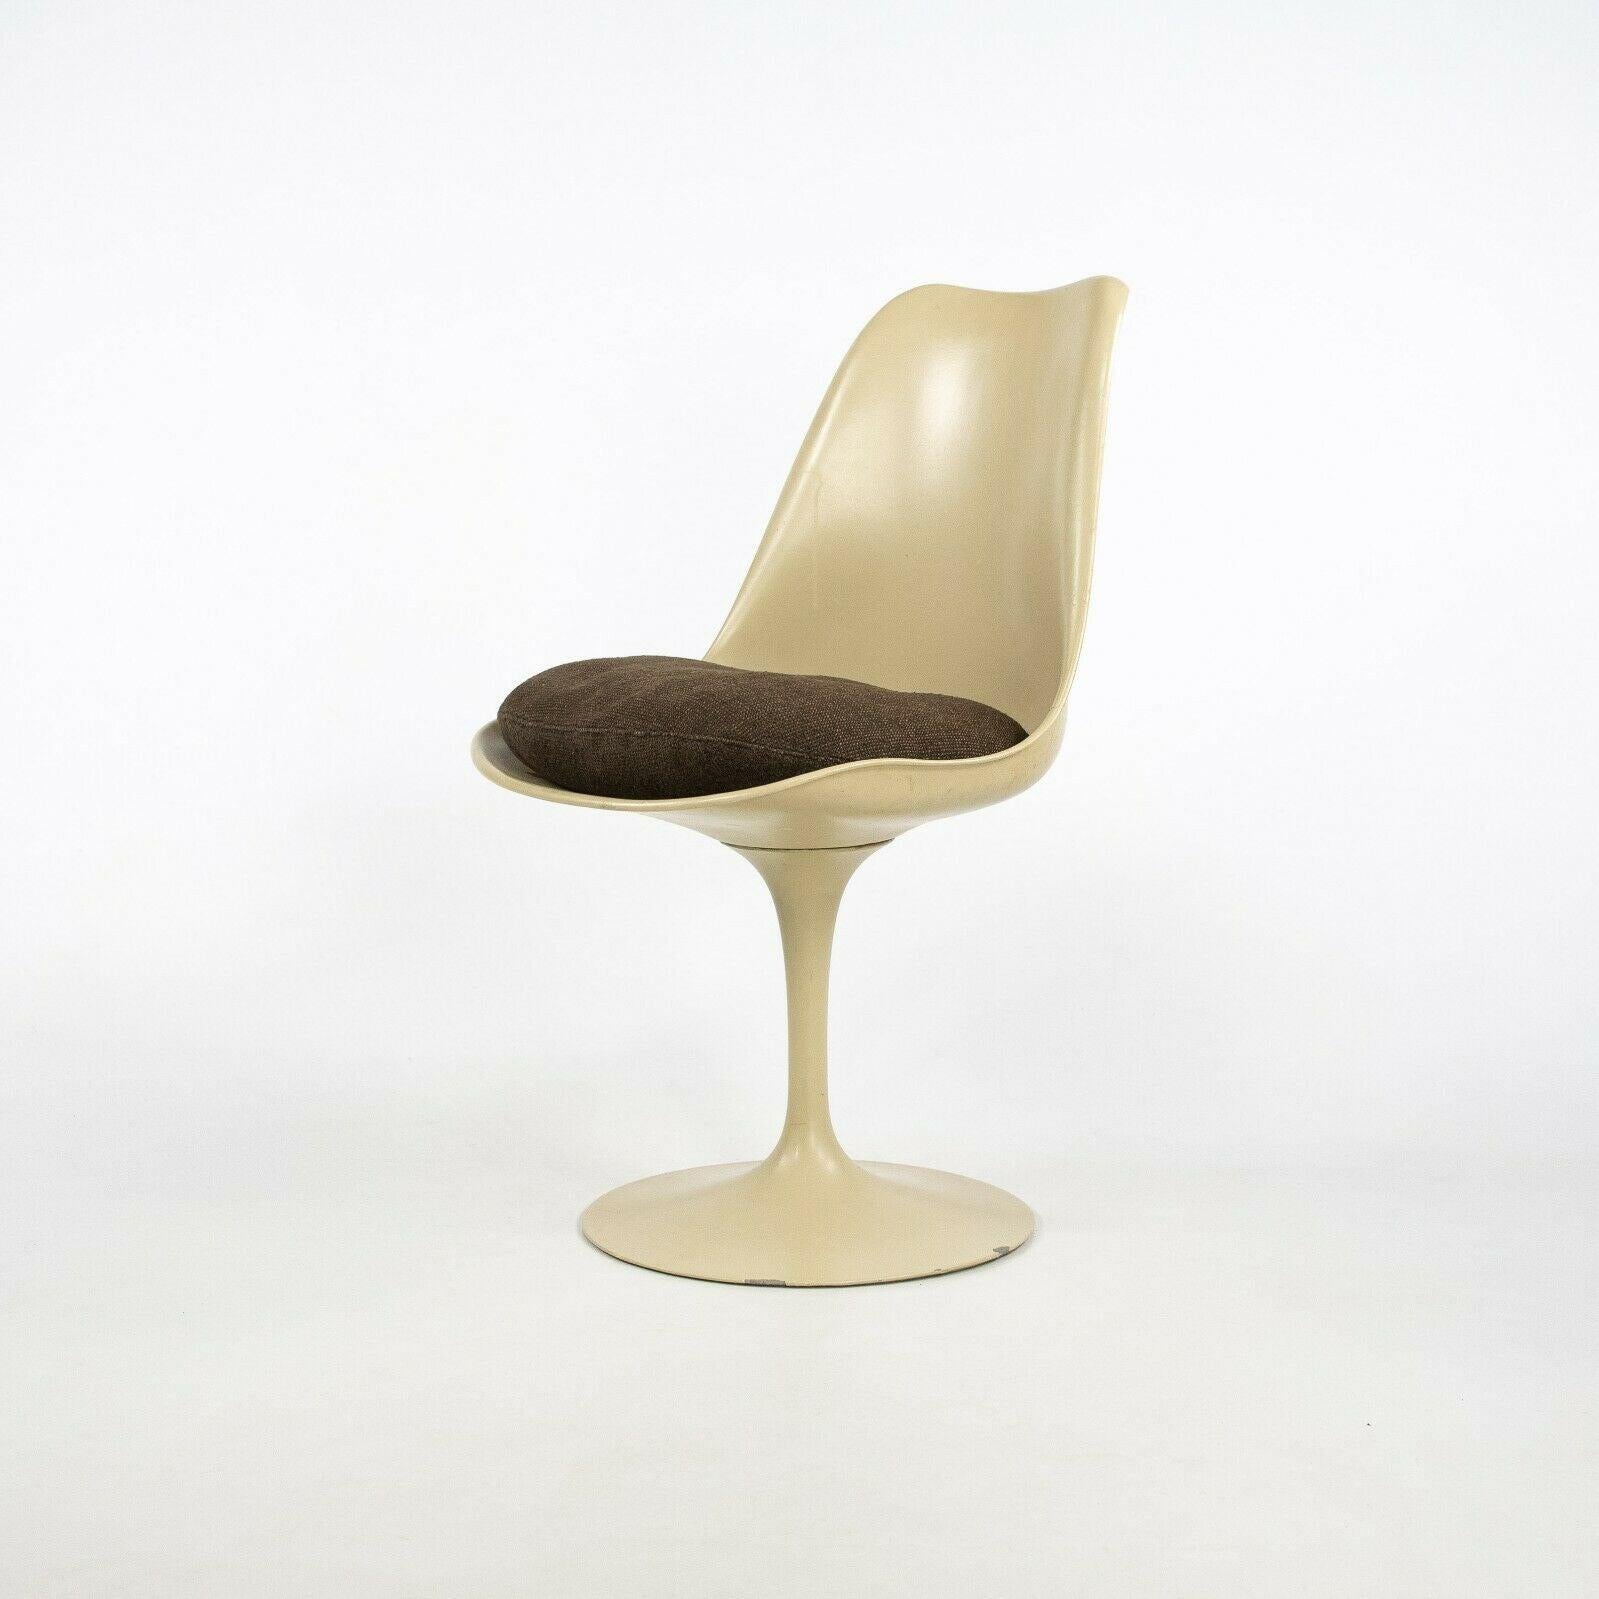 Modern 1960s Set of 4 Eero Saarinen for Knoll Armless Tulip Side Chairs in Brown Fabric For Sale